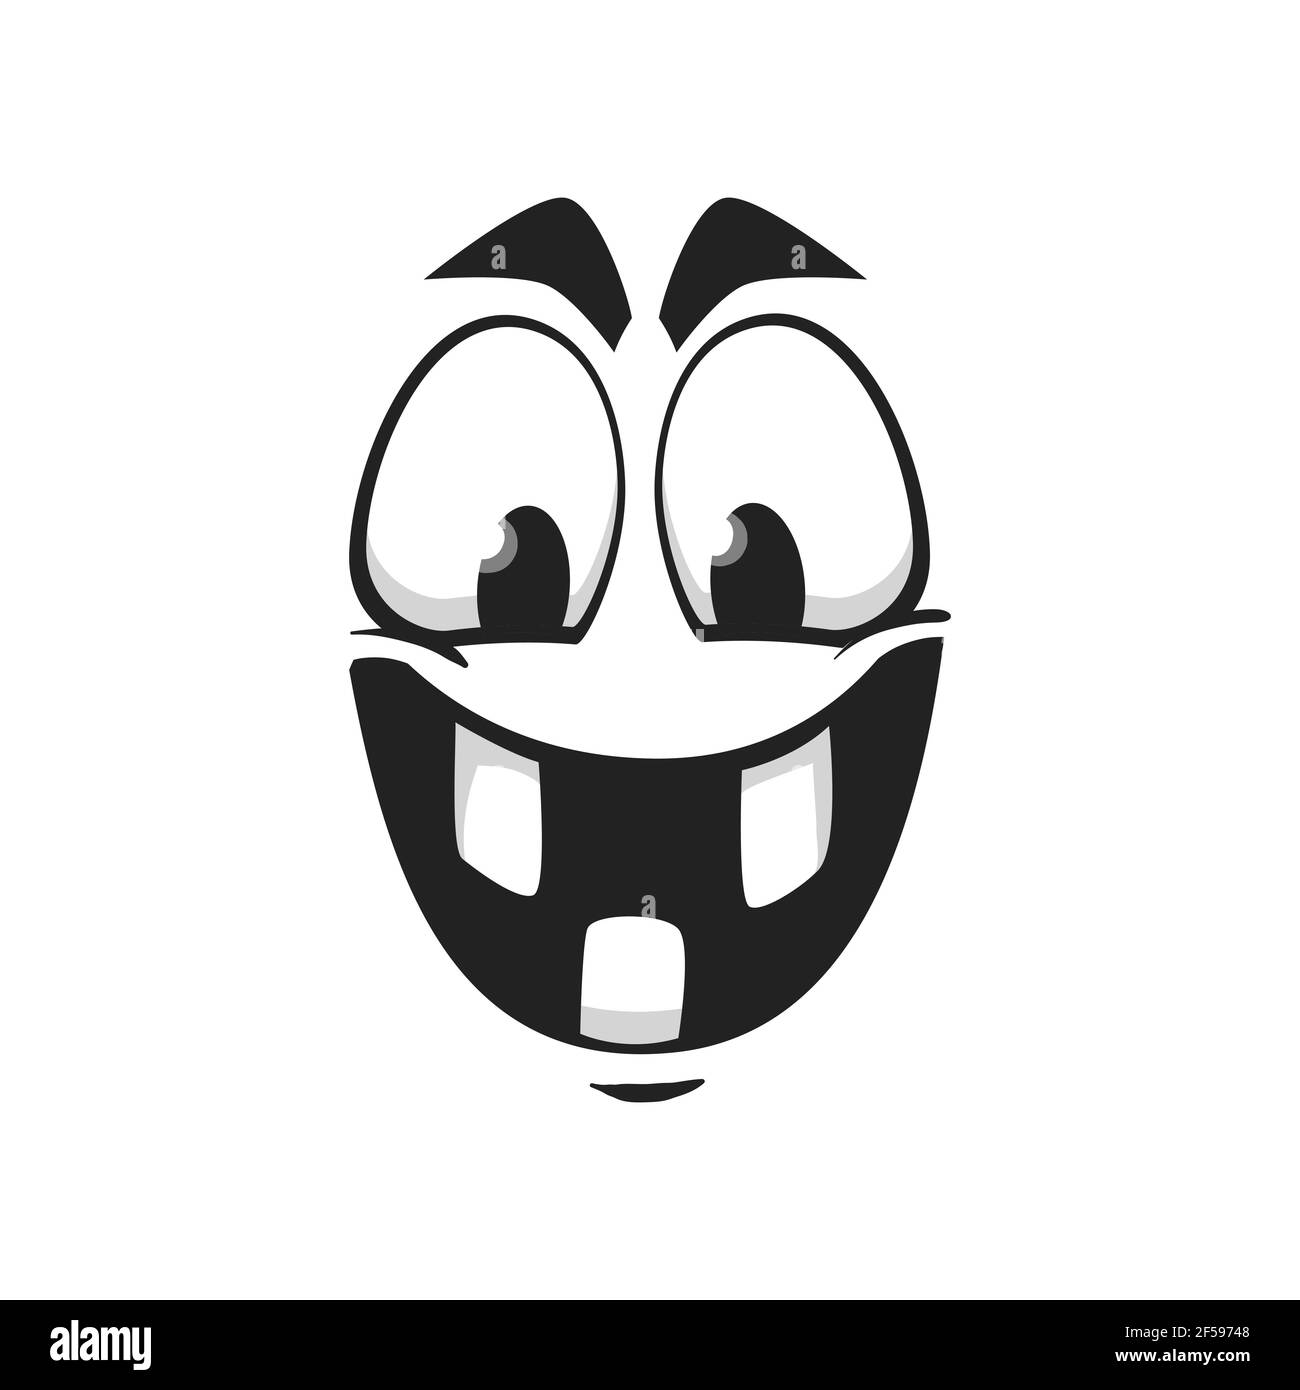 laughing faces cartoon